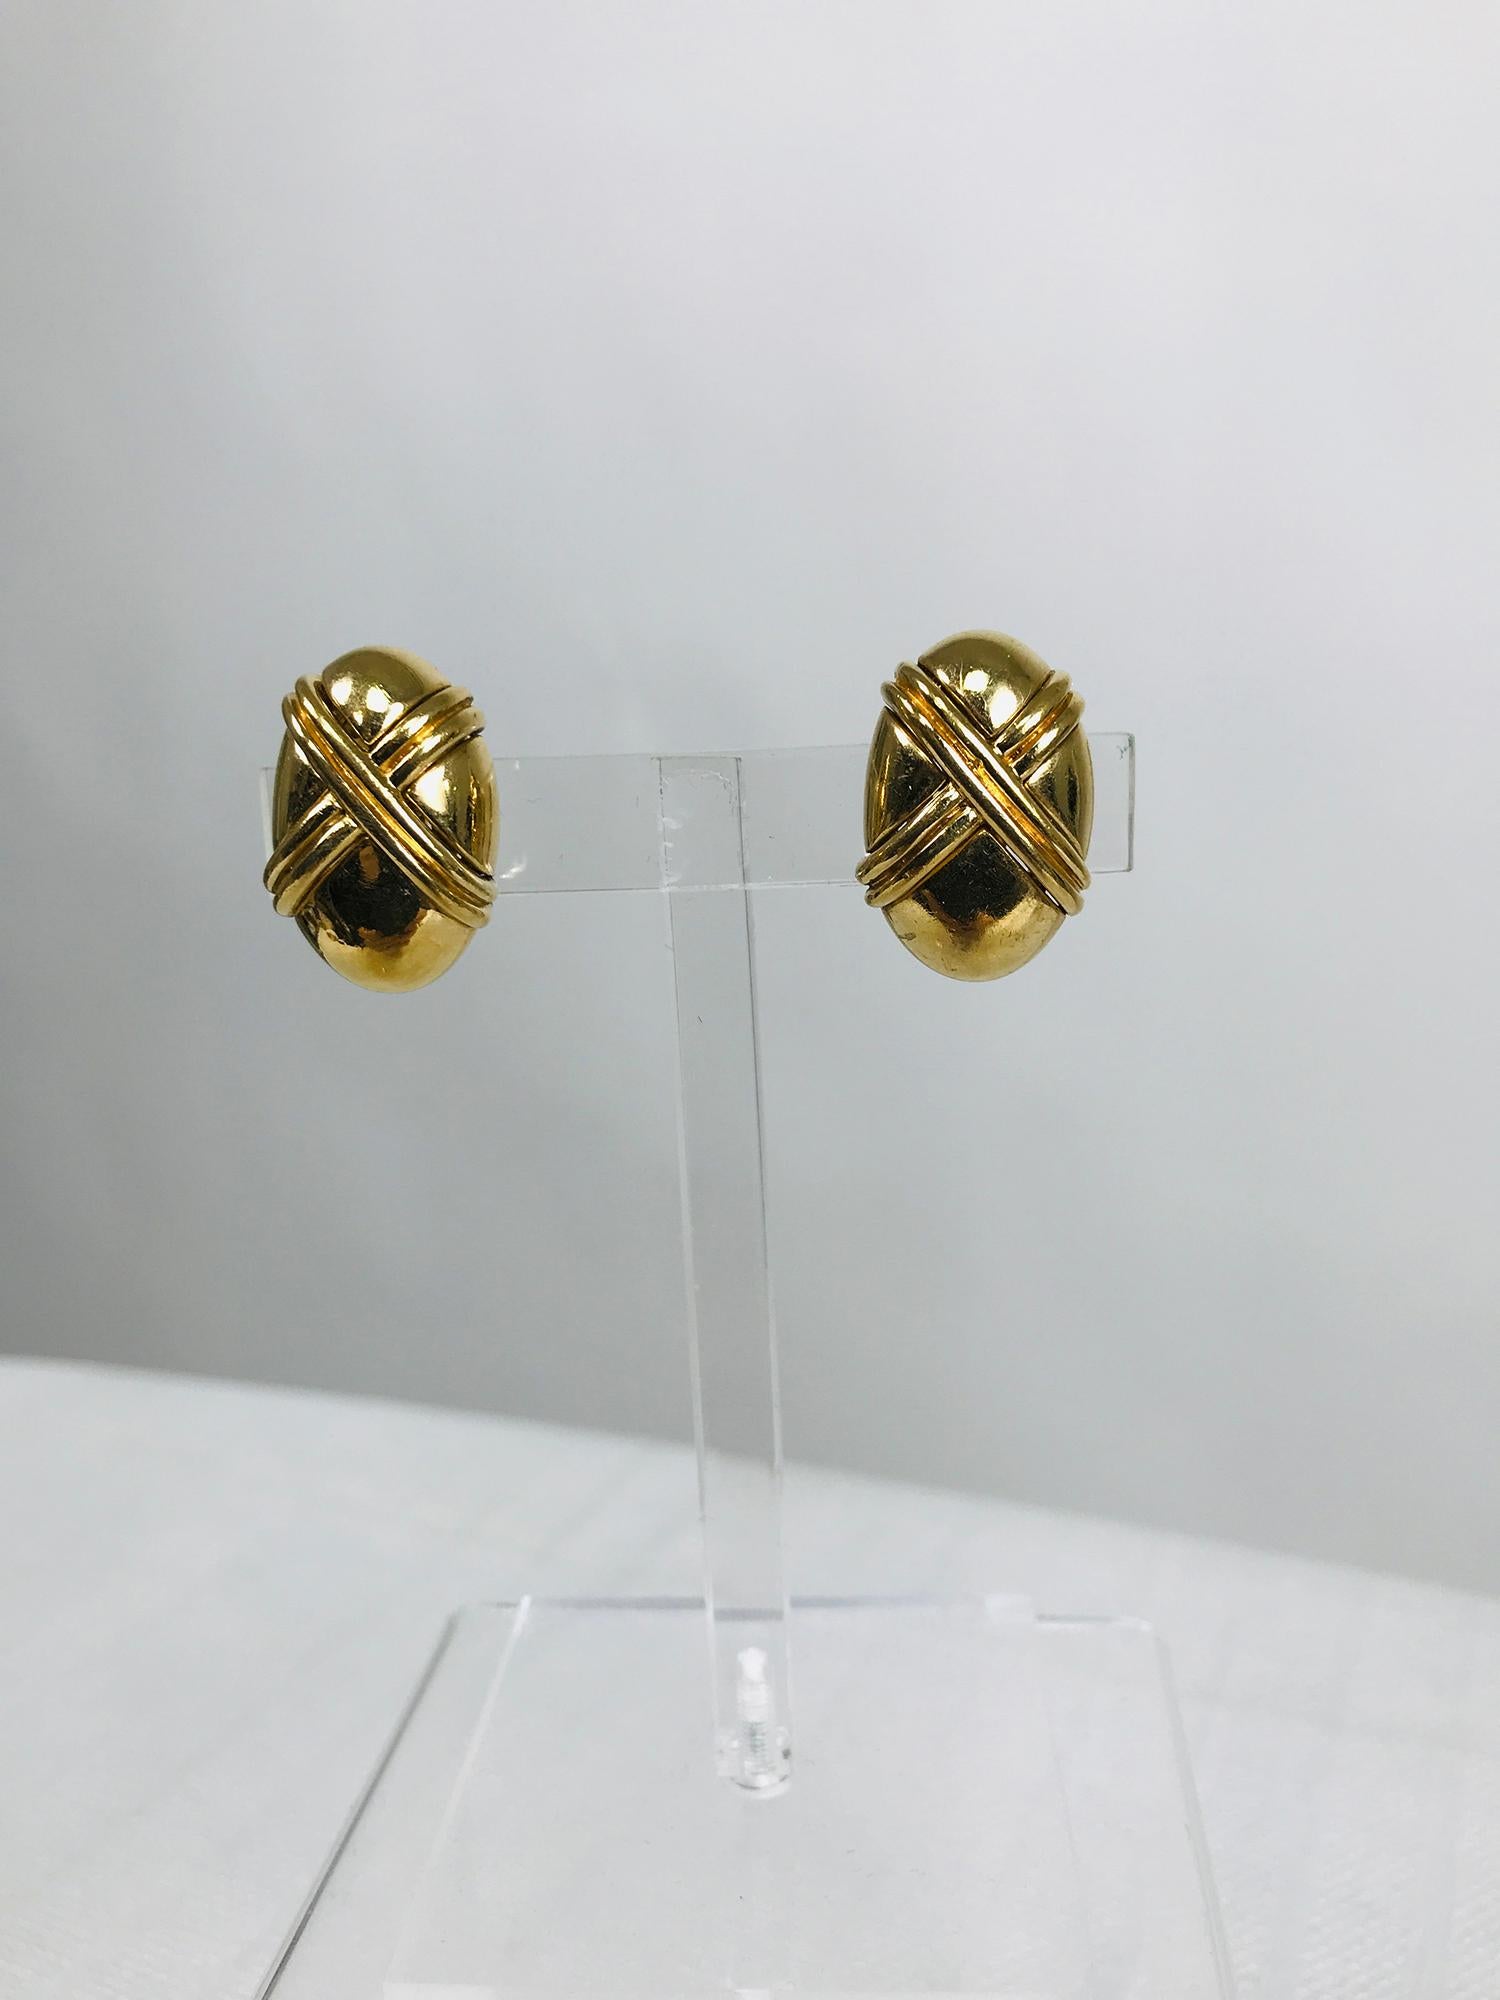 Ciner gold metal oval earrings with double X on each earring, classic style. Beautiful three dimensional earrings have raised sides. In excellent condition. Approximately 1